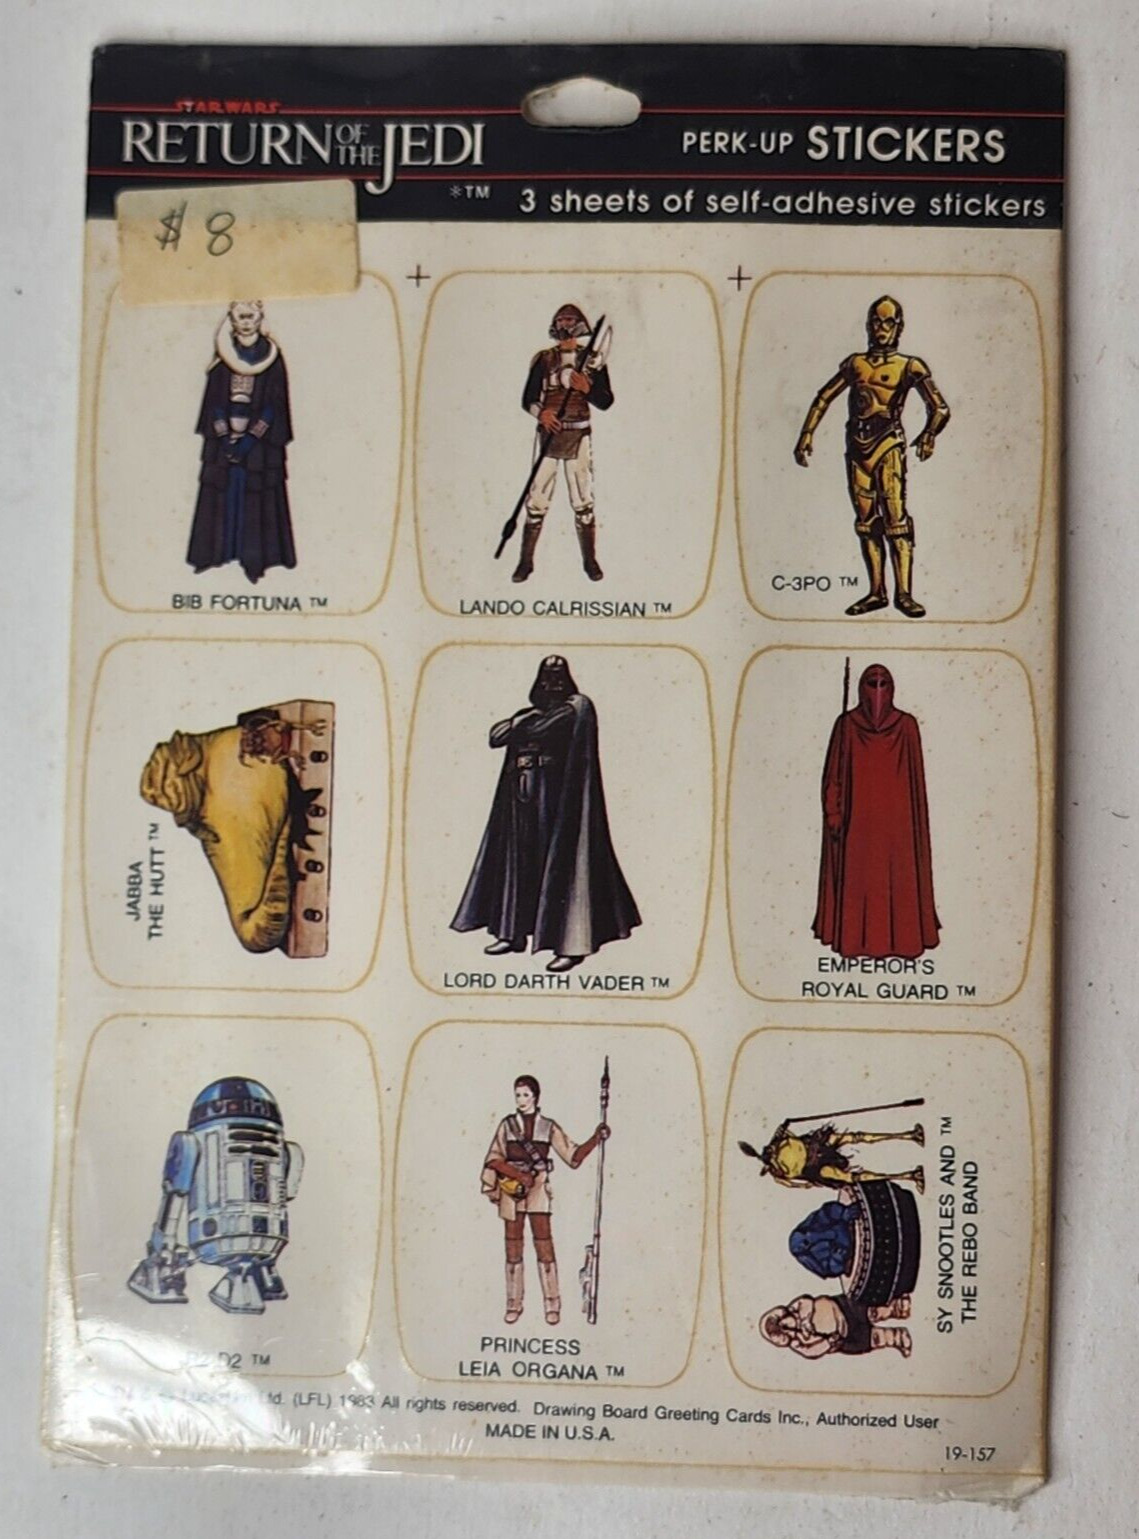 Vintage 1983 Star Wars Return Of The Jedi Stickers Made in the USA